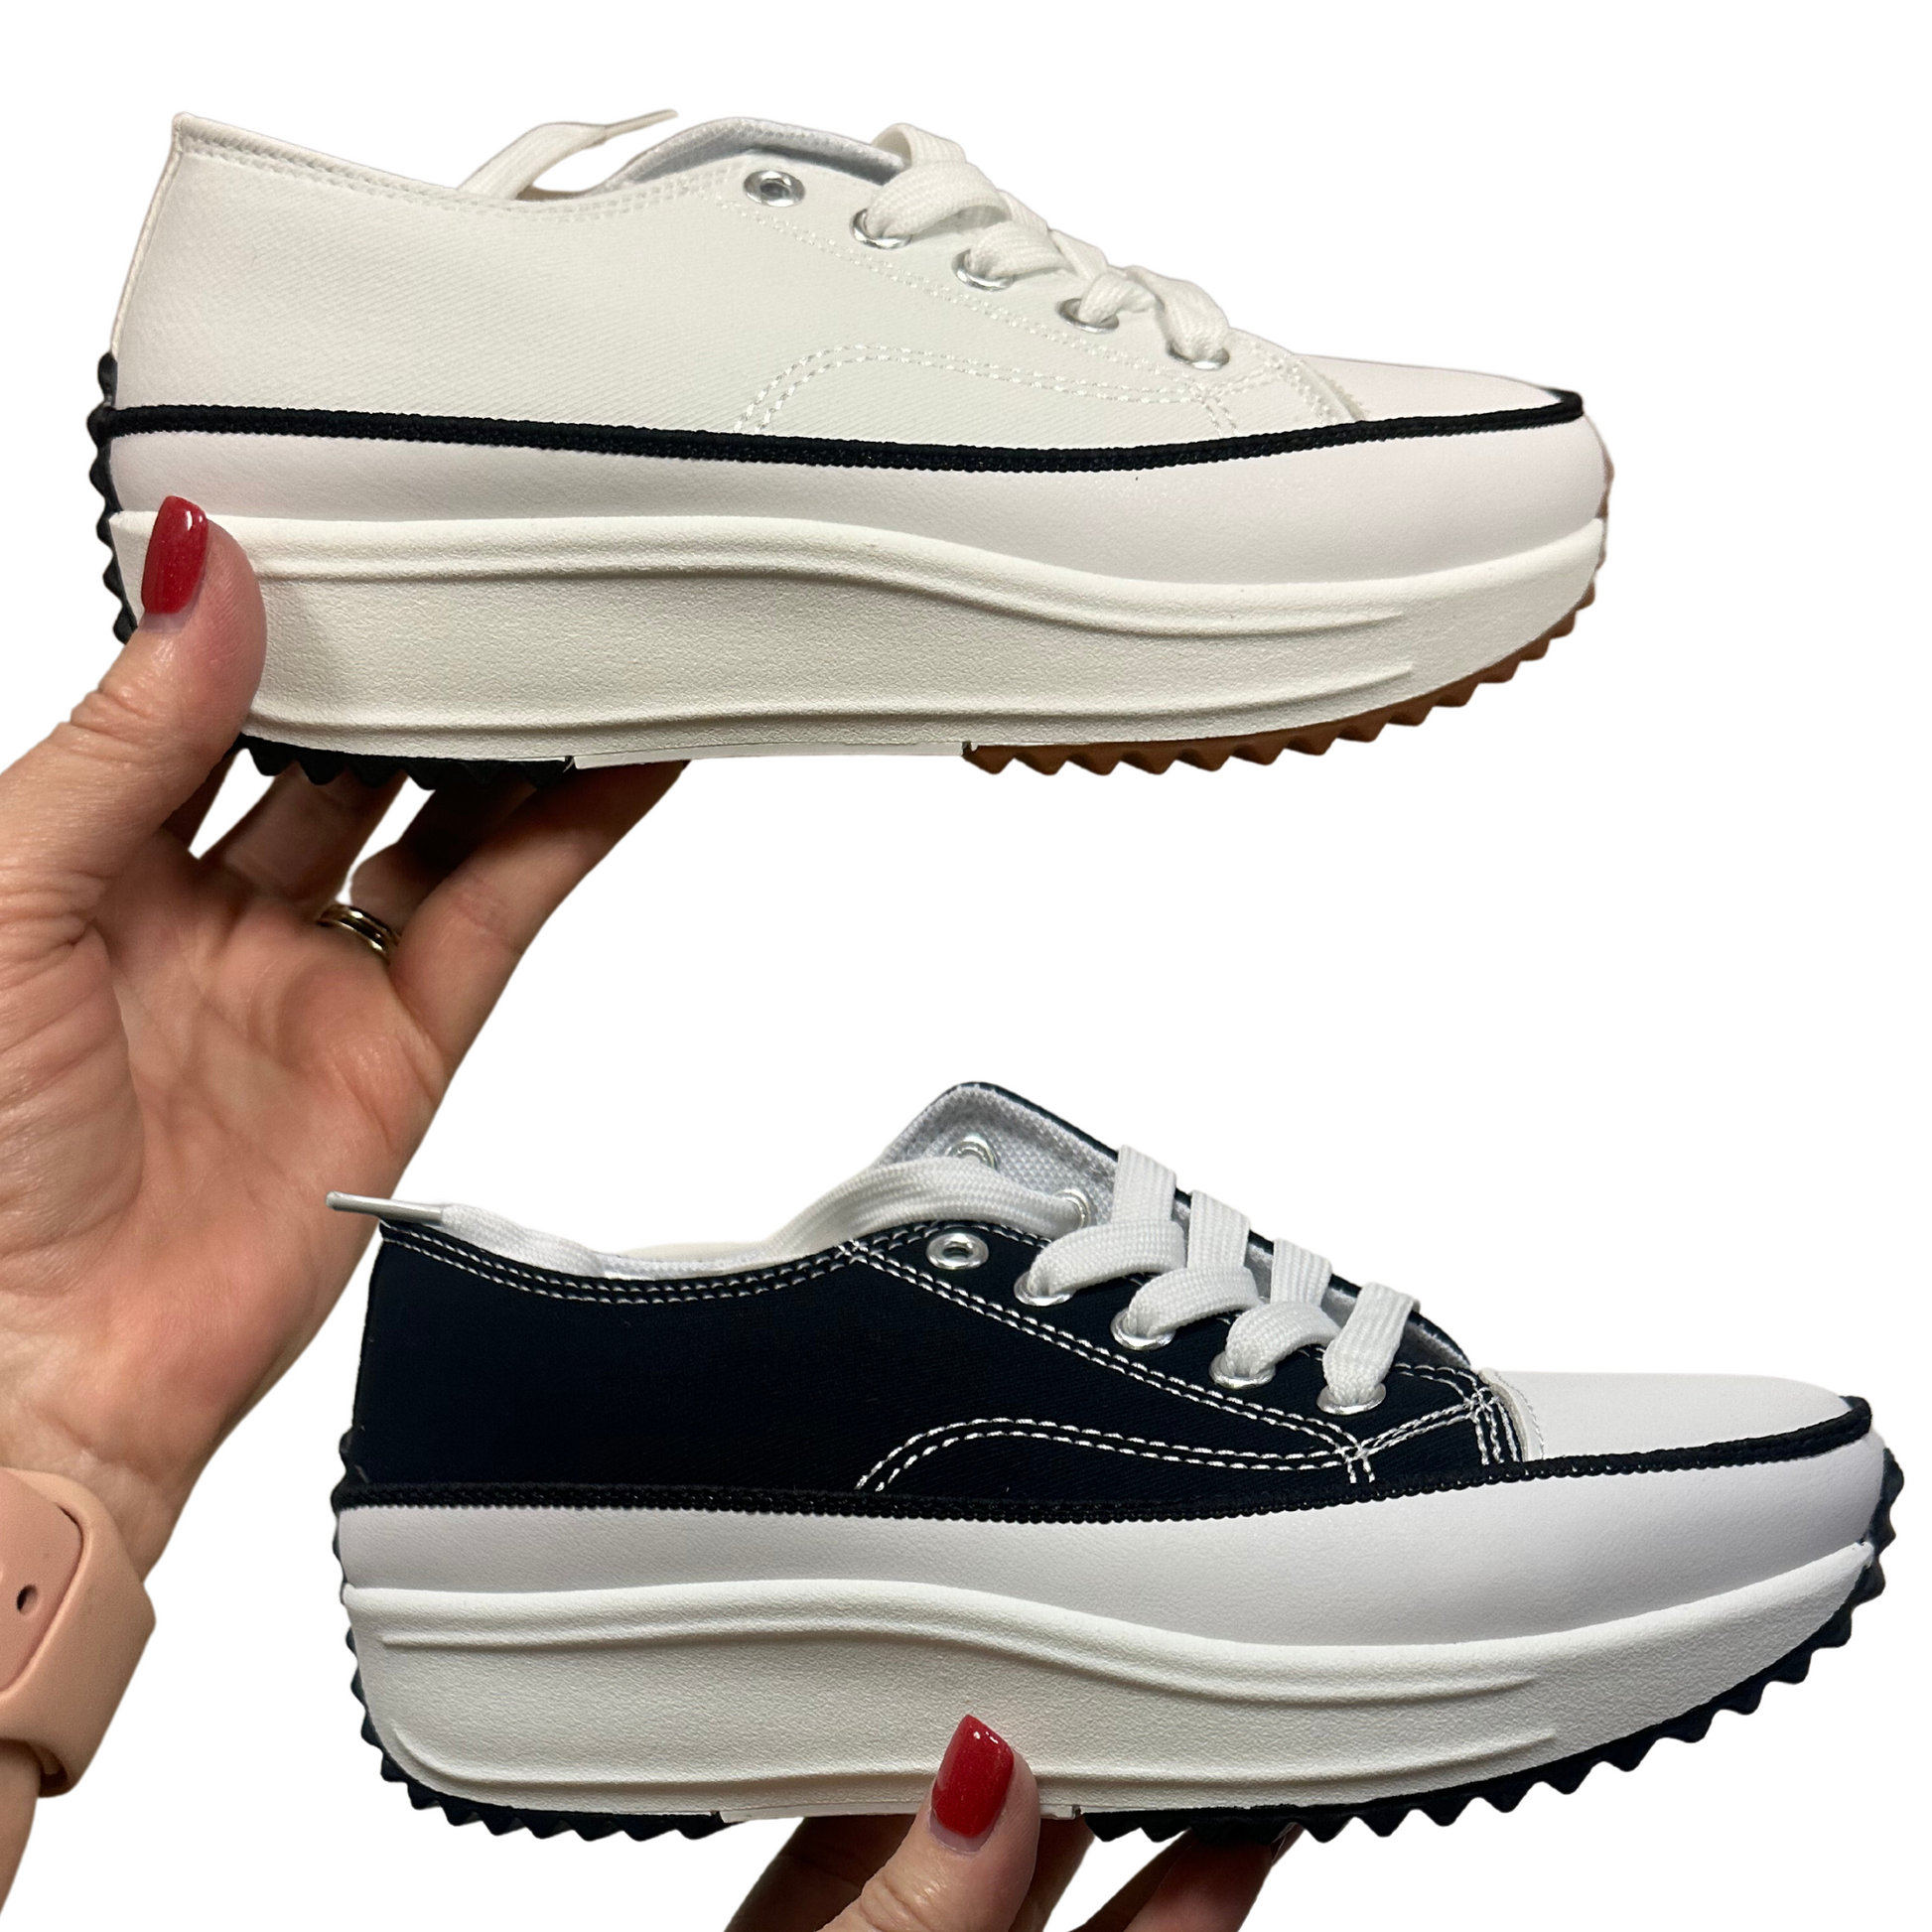 Stay comfortable and stylish in our Women's Sneakers, featuring a lightweight design and colors ranging from white to black. Keep your feet at ease with our quality materials and reliable fit.